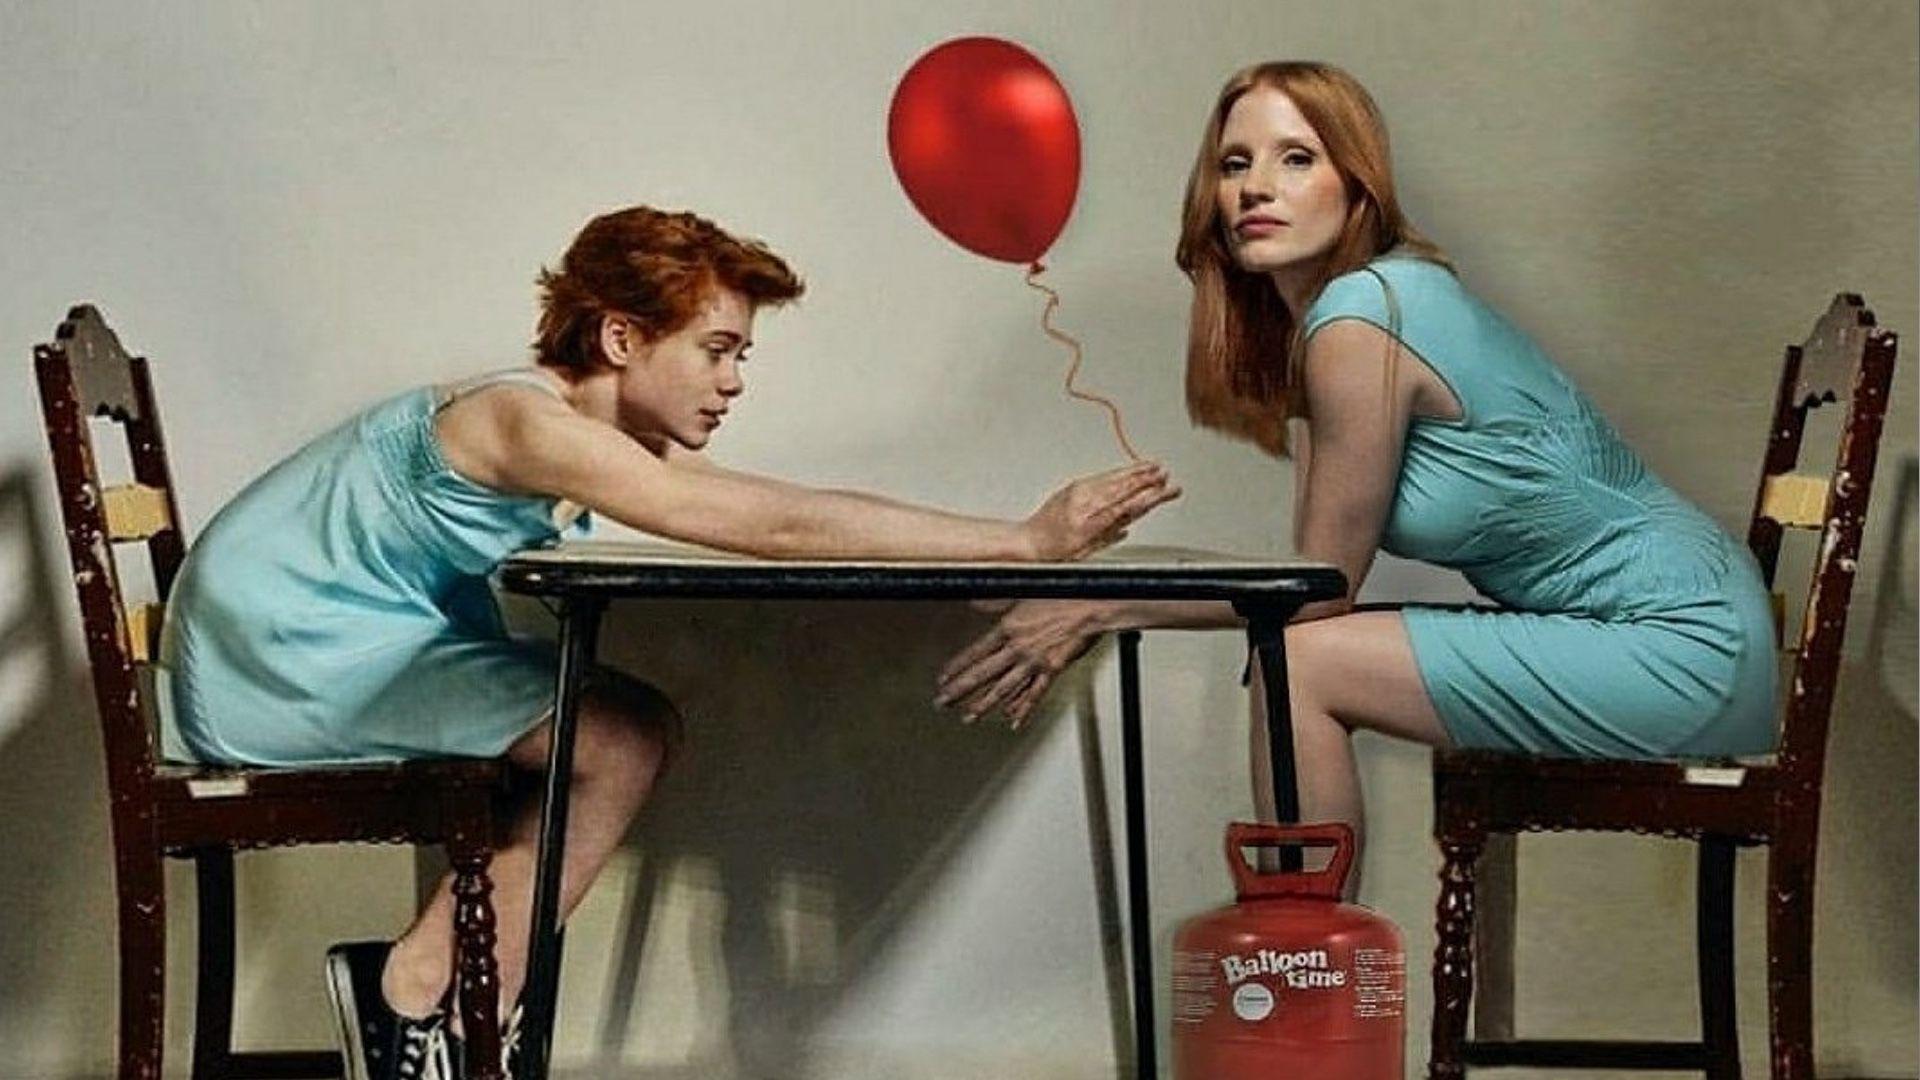 New IT CHAPTER Photo Features Young Beverly Passing The Red